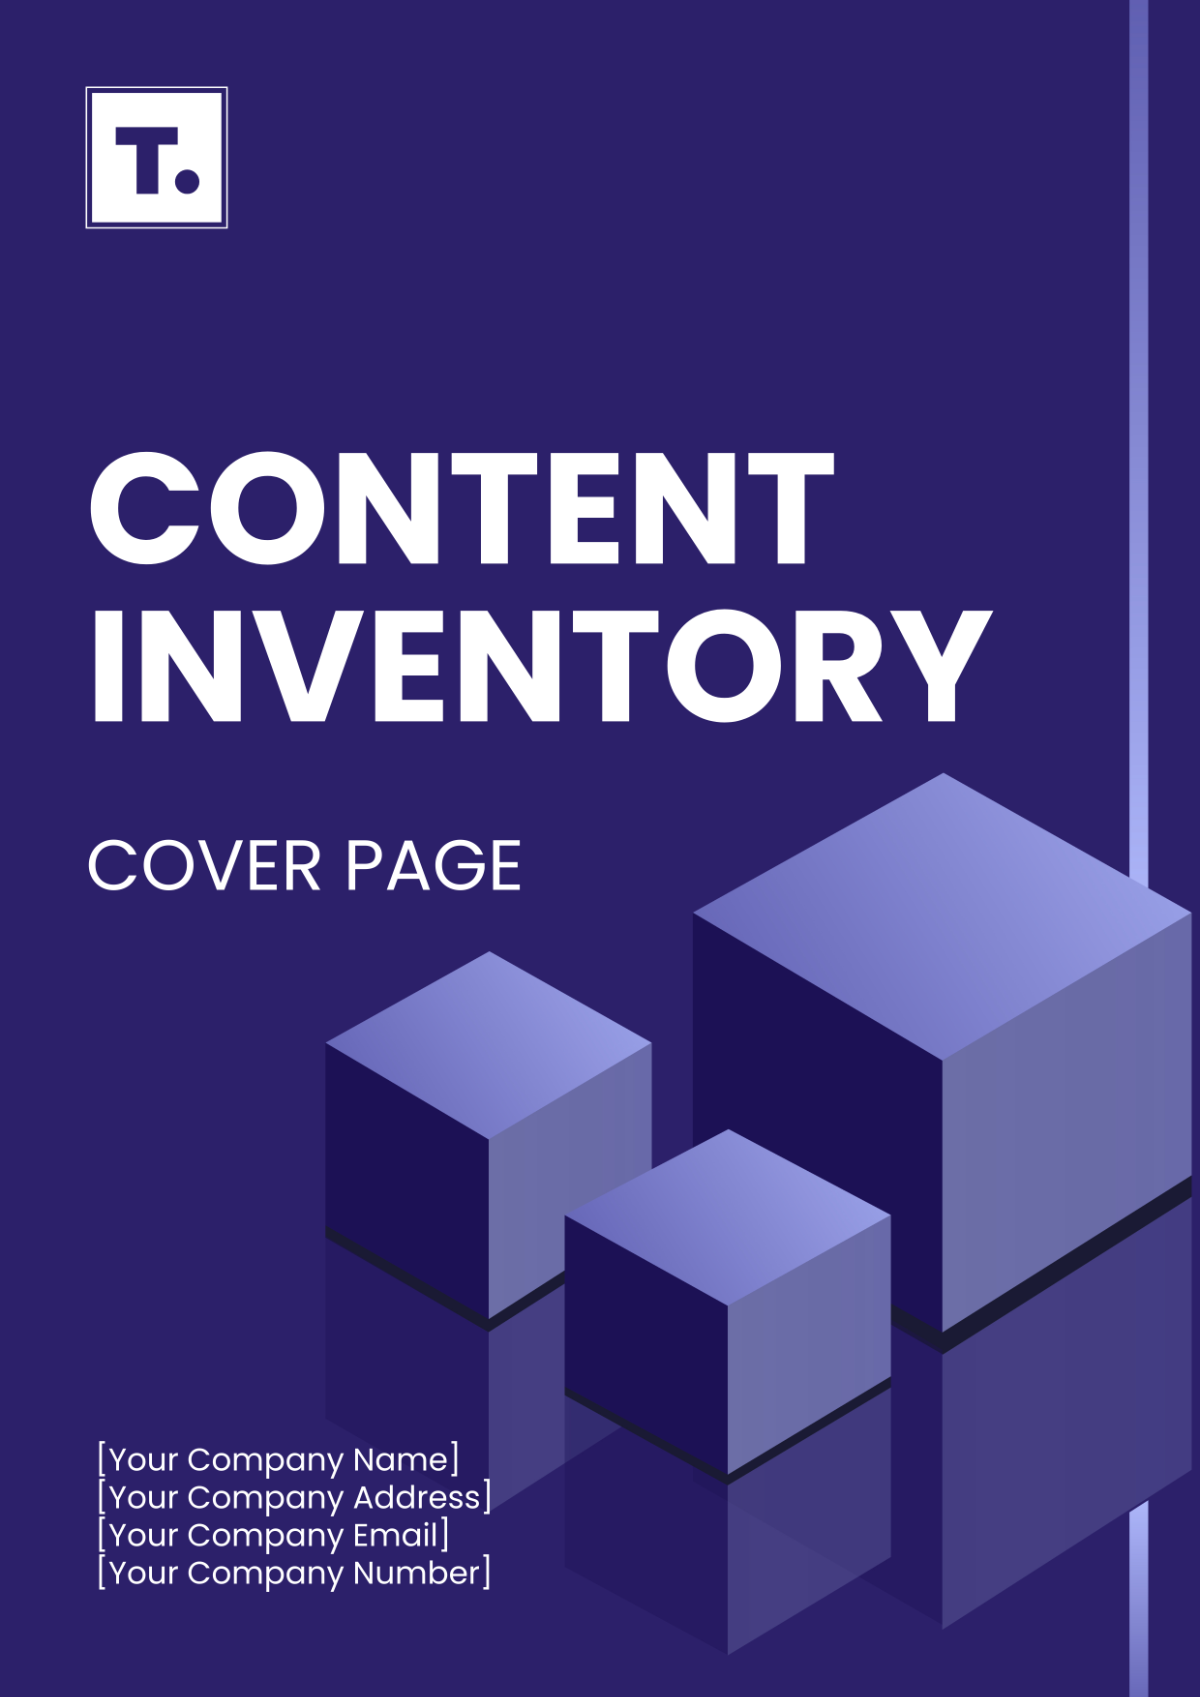 Content Inventory Cover Page